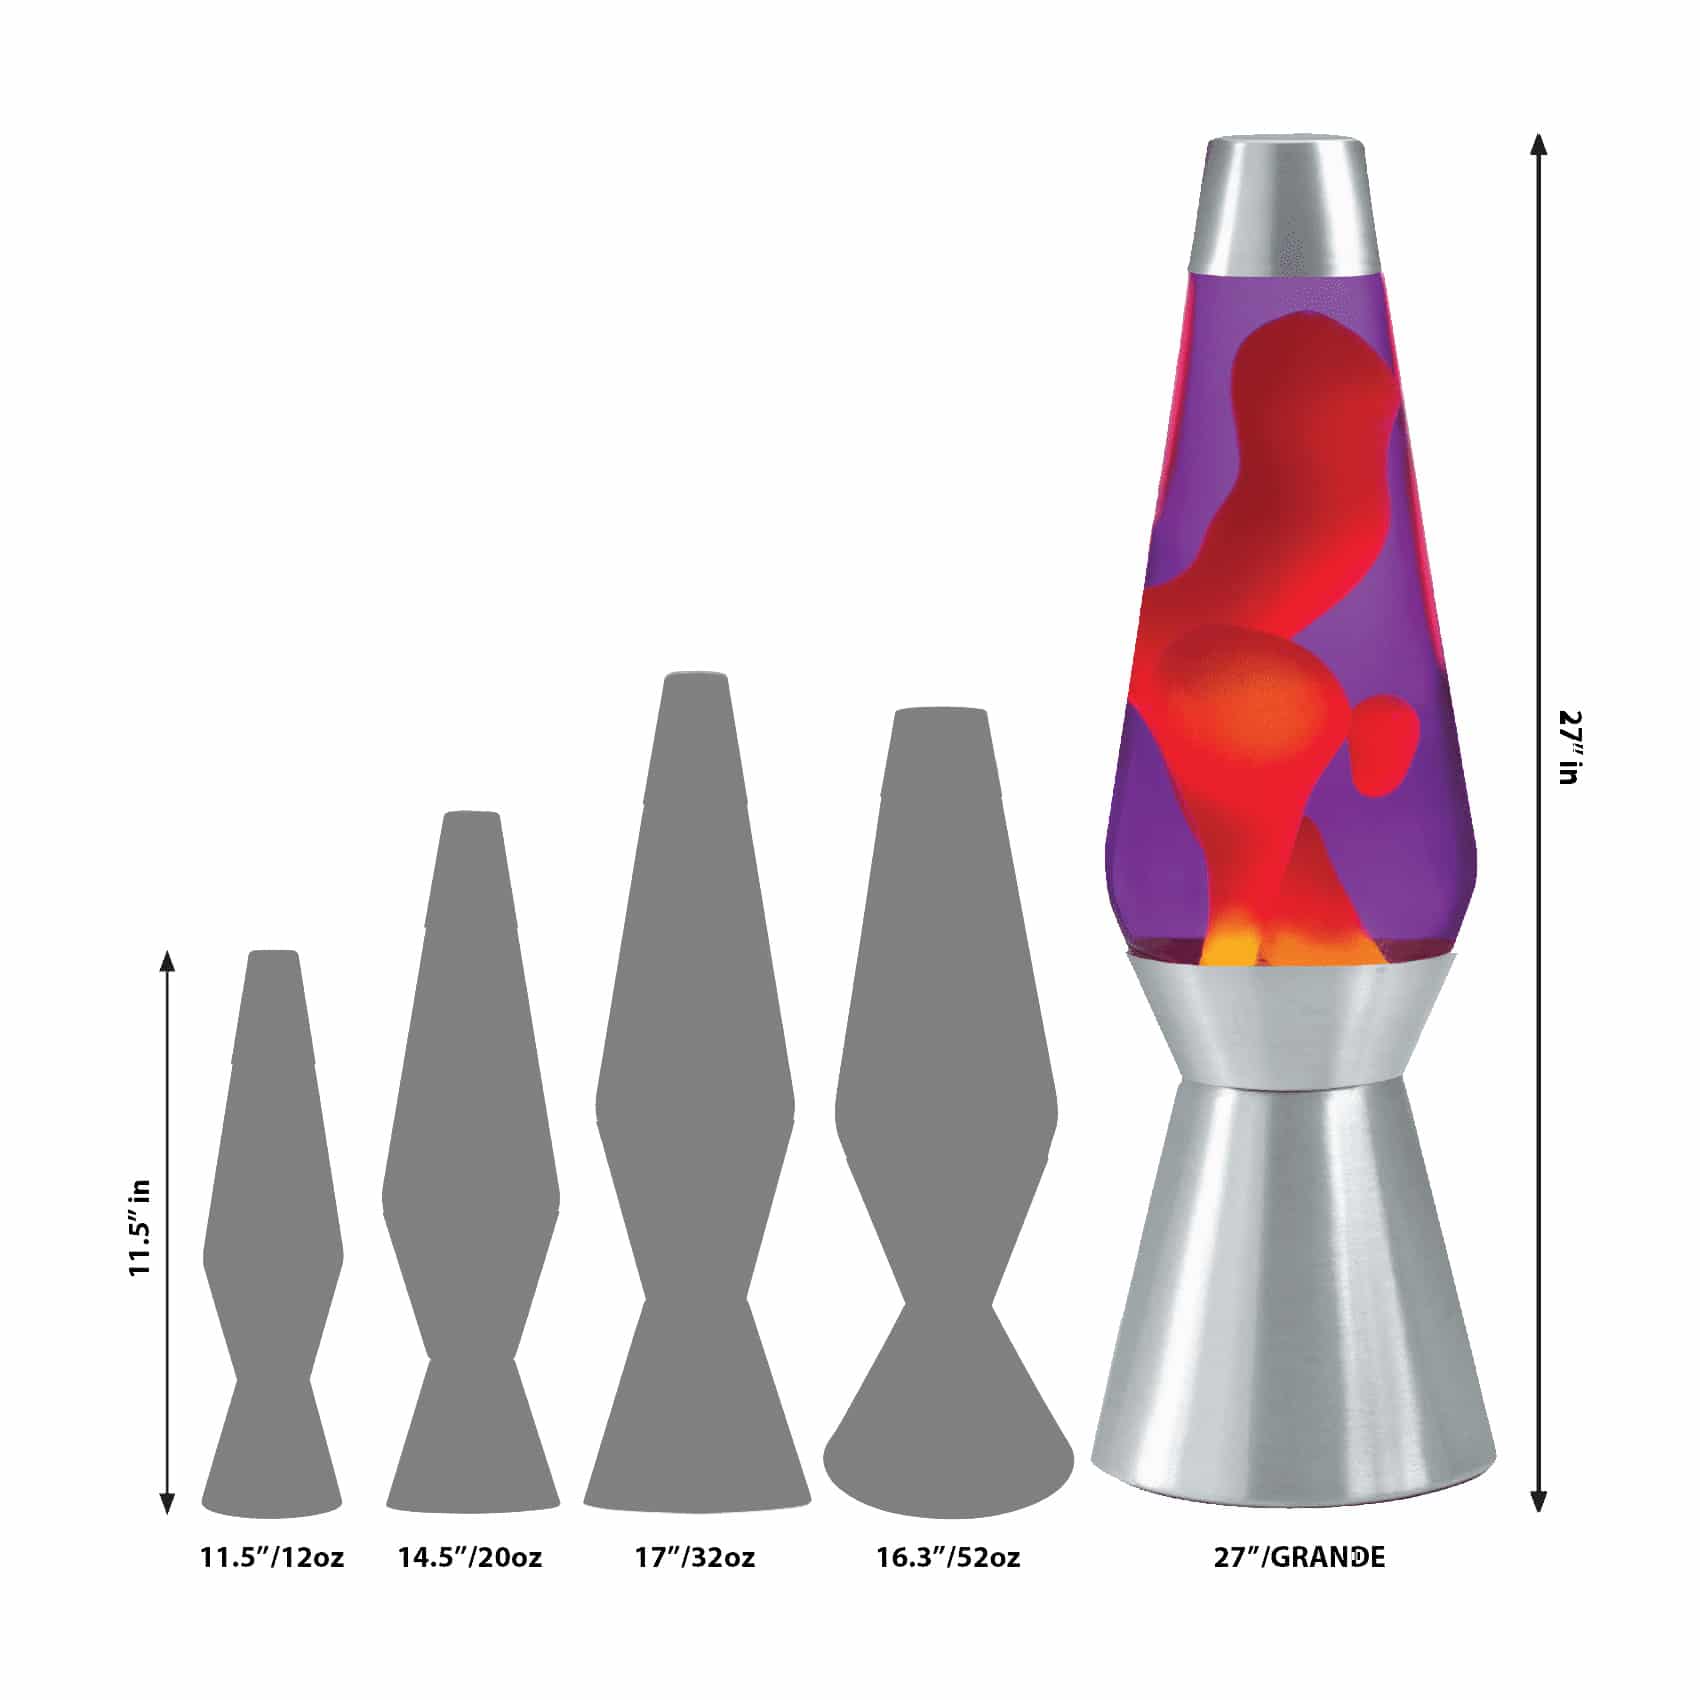 An infographic depicting the size of the 27" Lava Lamp compared to other sizes.